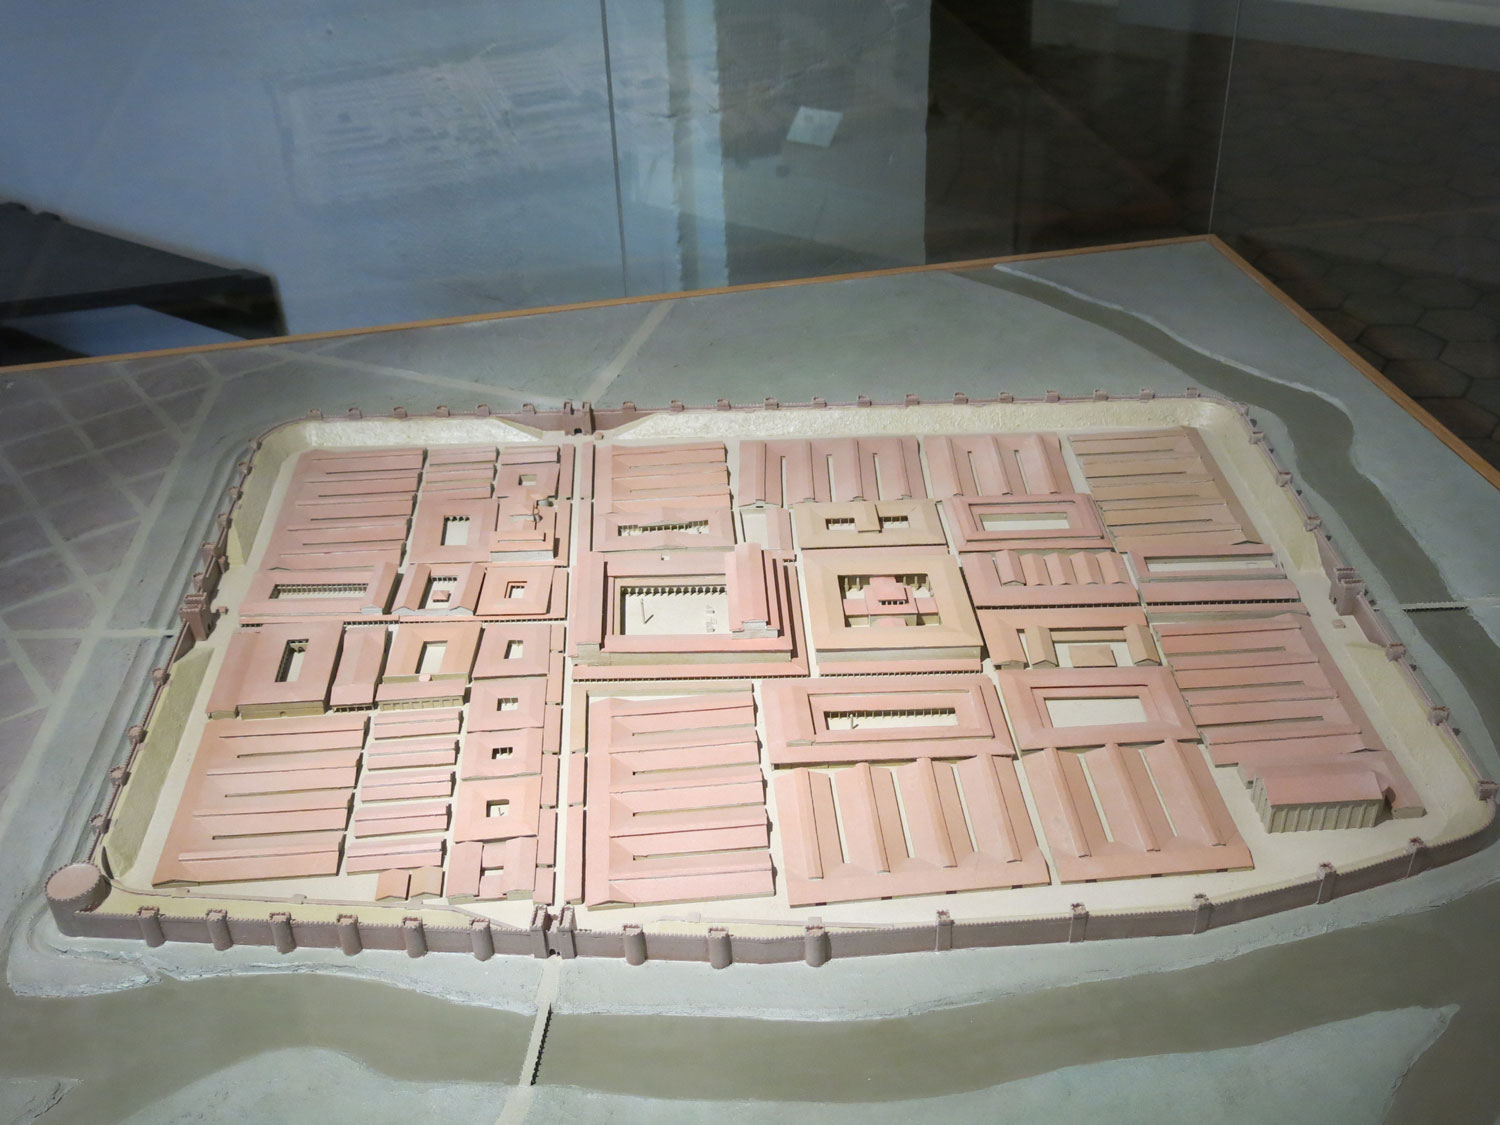 Model of the Roman camp of Argentoratum at the Archaeological Museum of Strasbourg